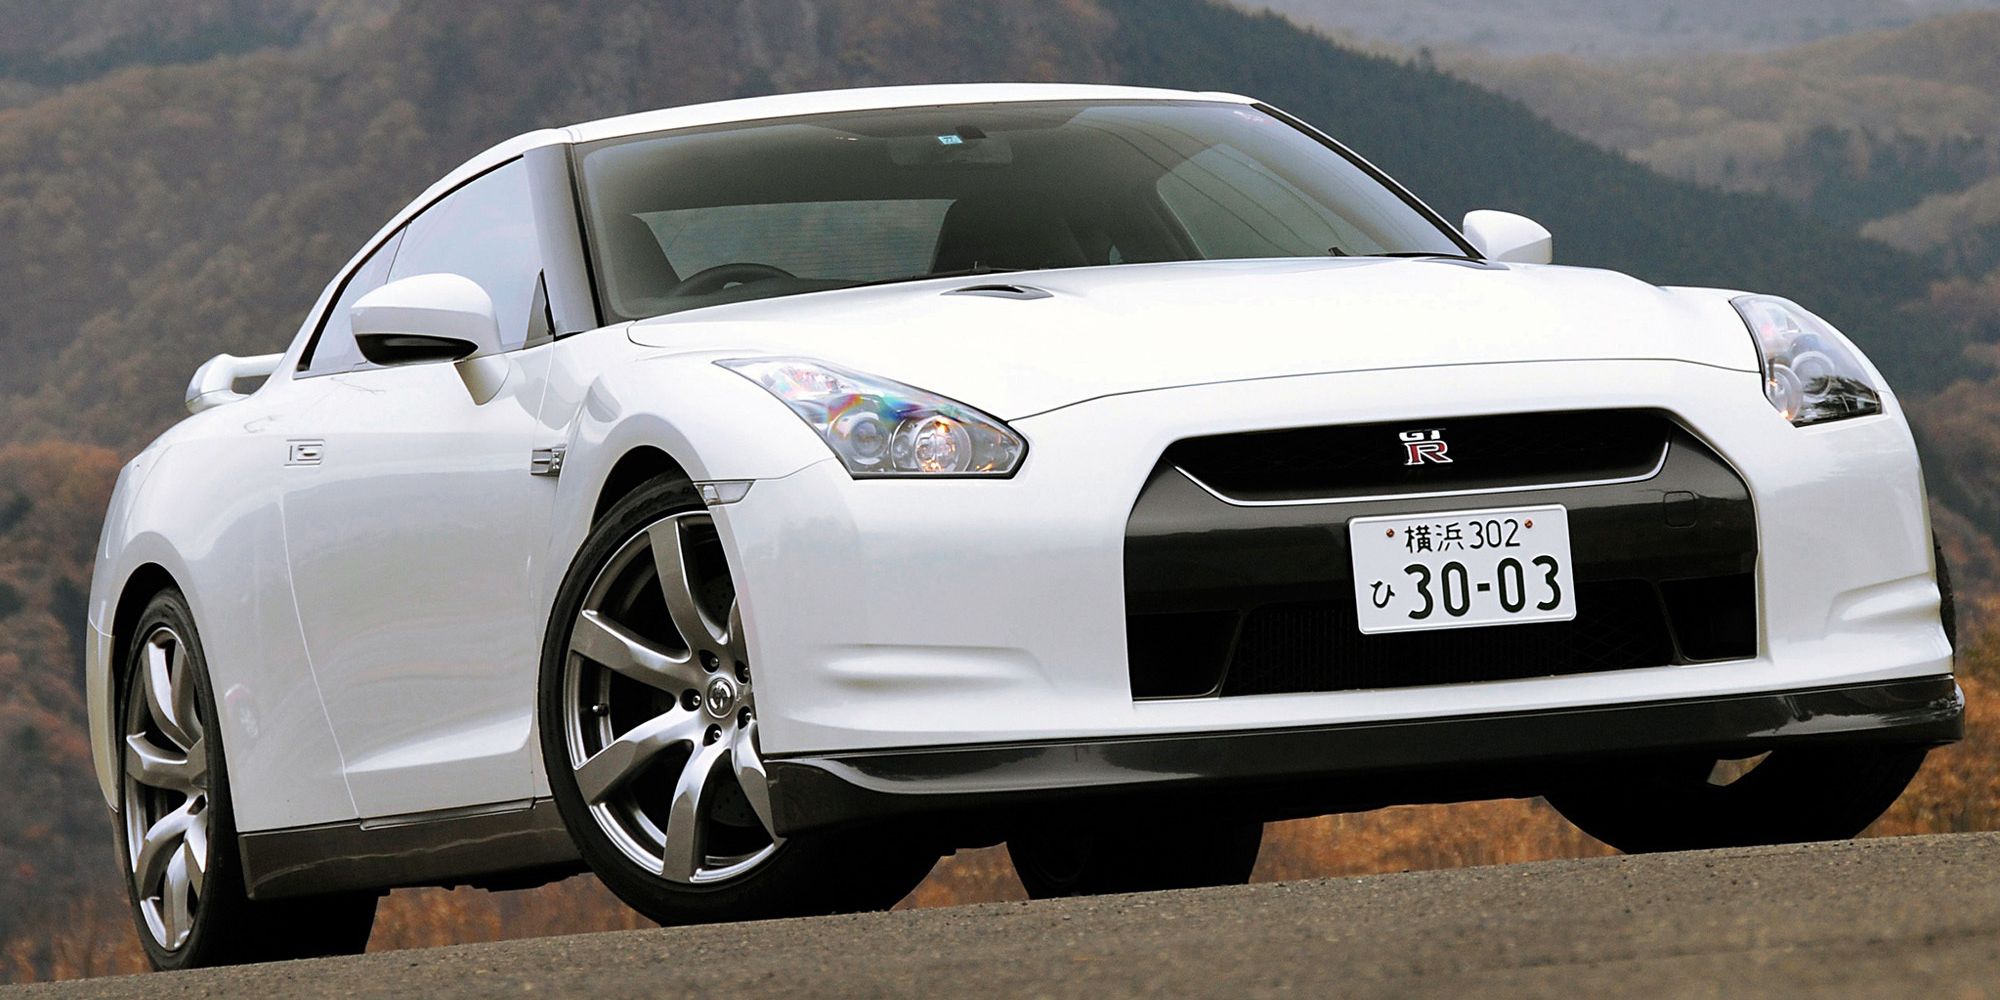 The front of the R35 GTR